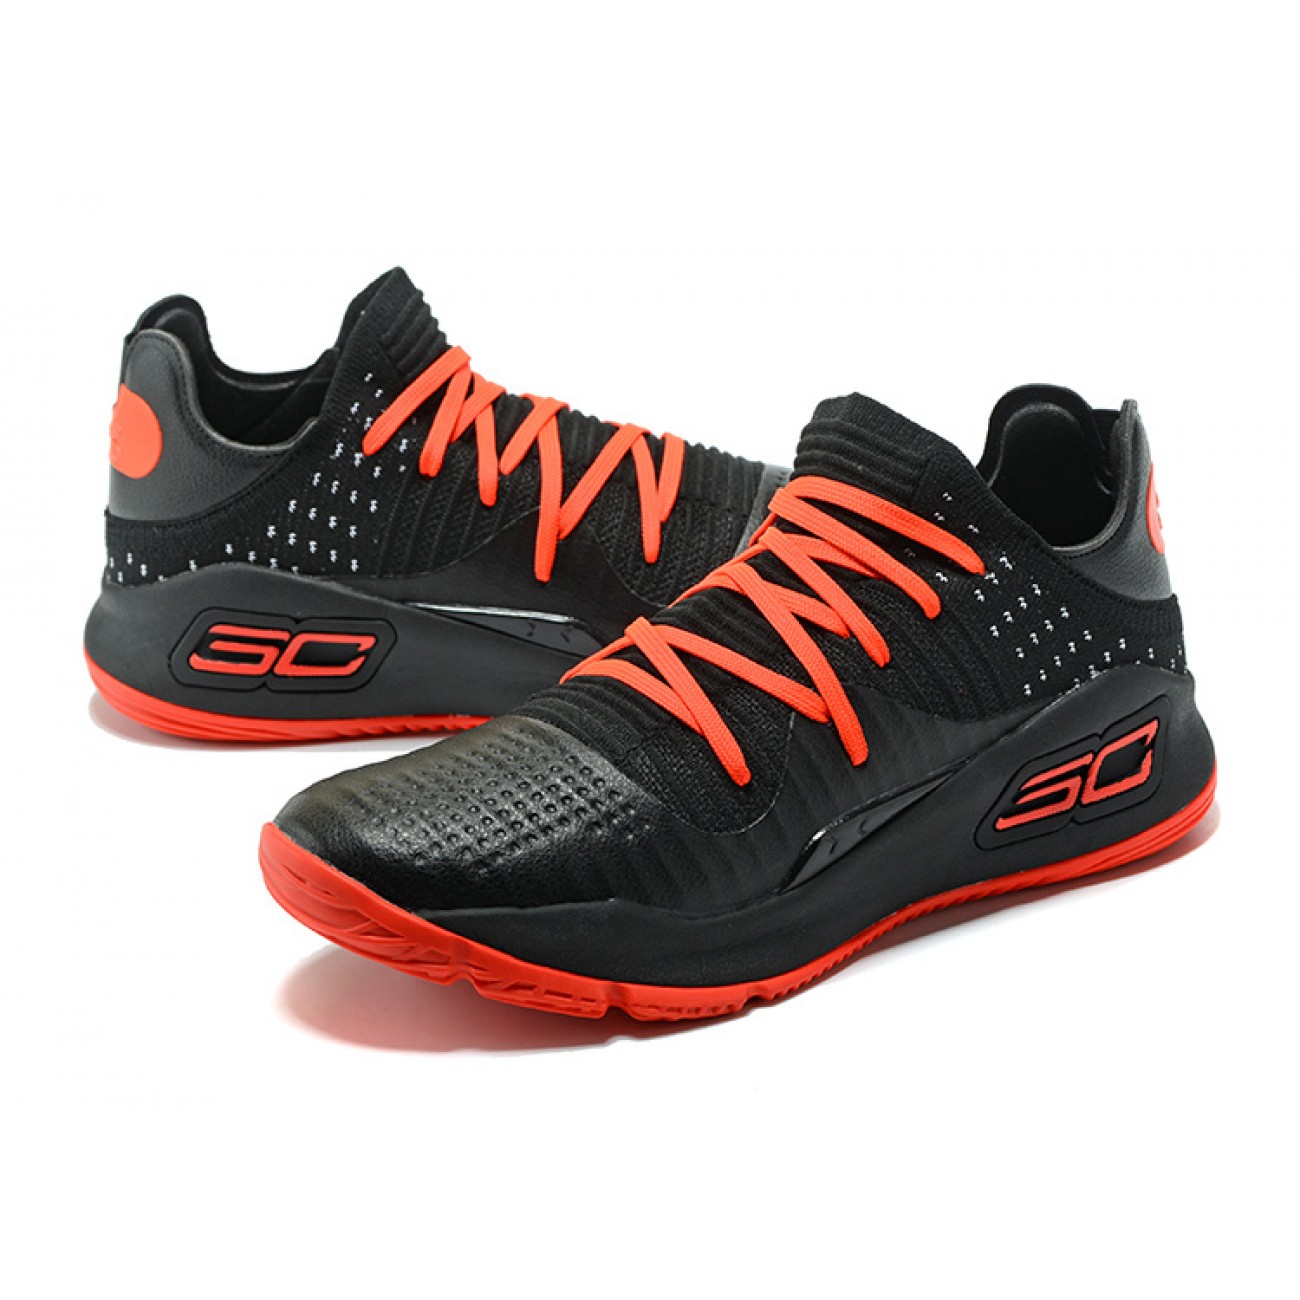 Under Armour UA Curry 4 Low Black/Red